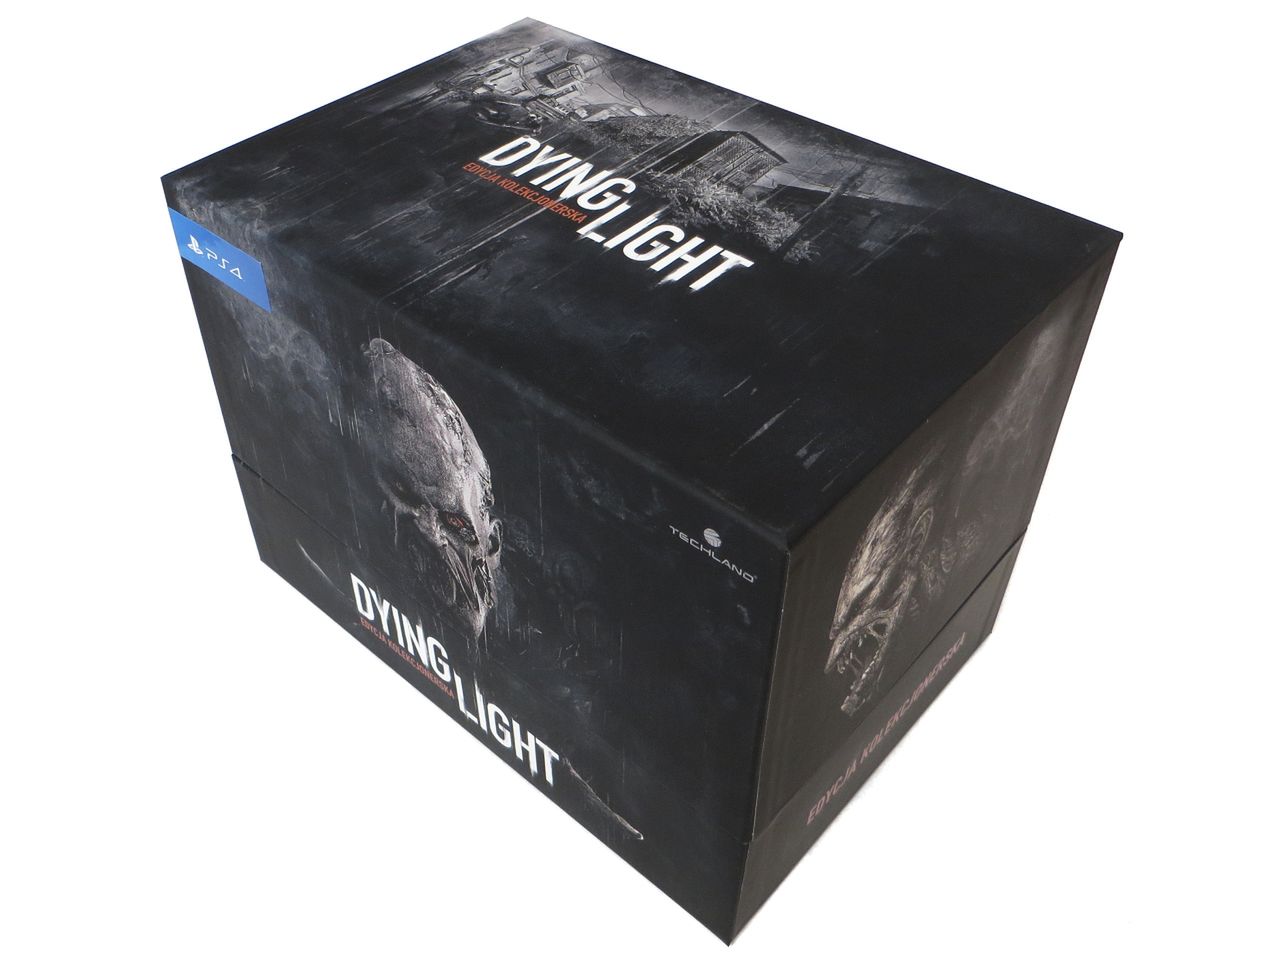 Figurkowy zawrót głowy — Dying Light Collector's Unboxing Edition